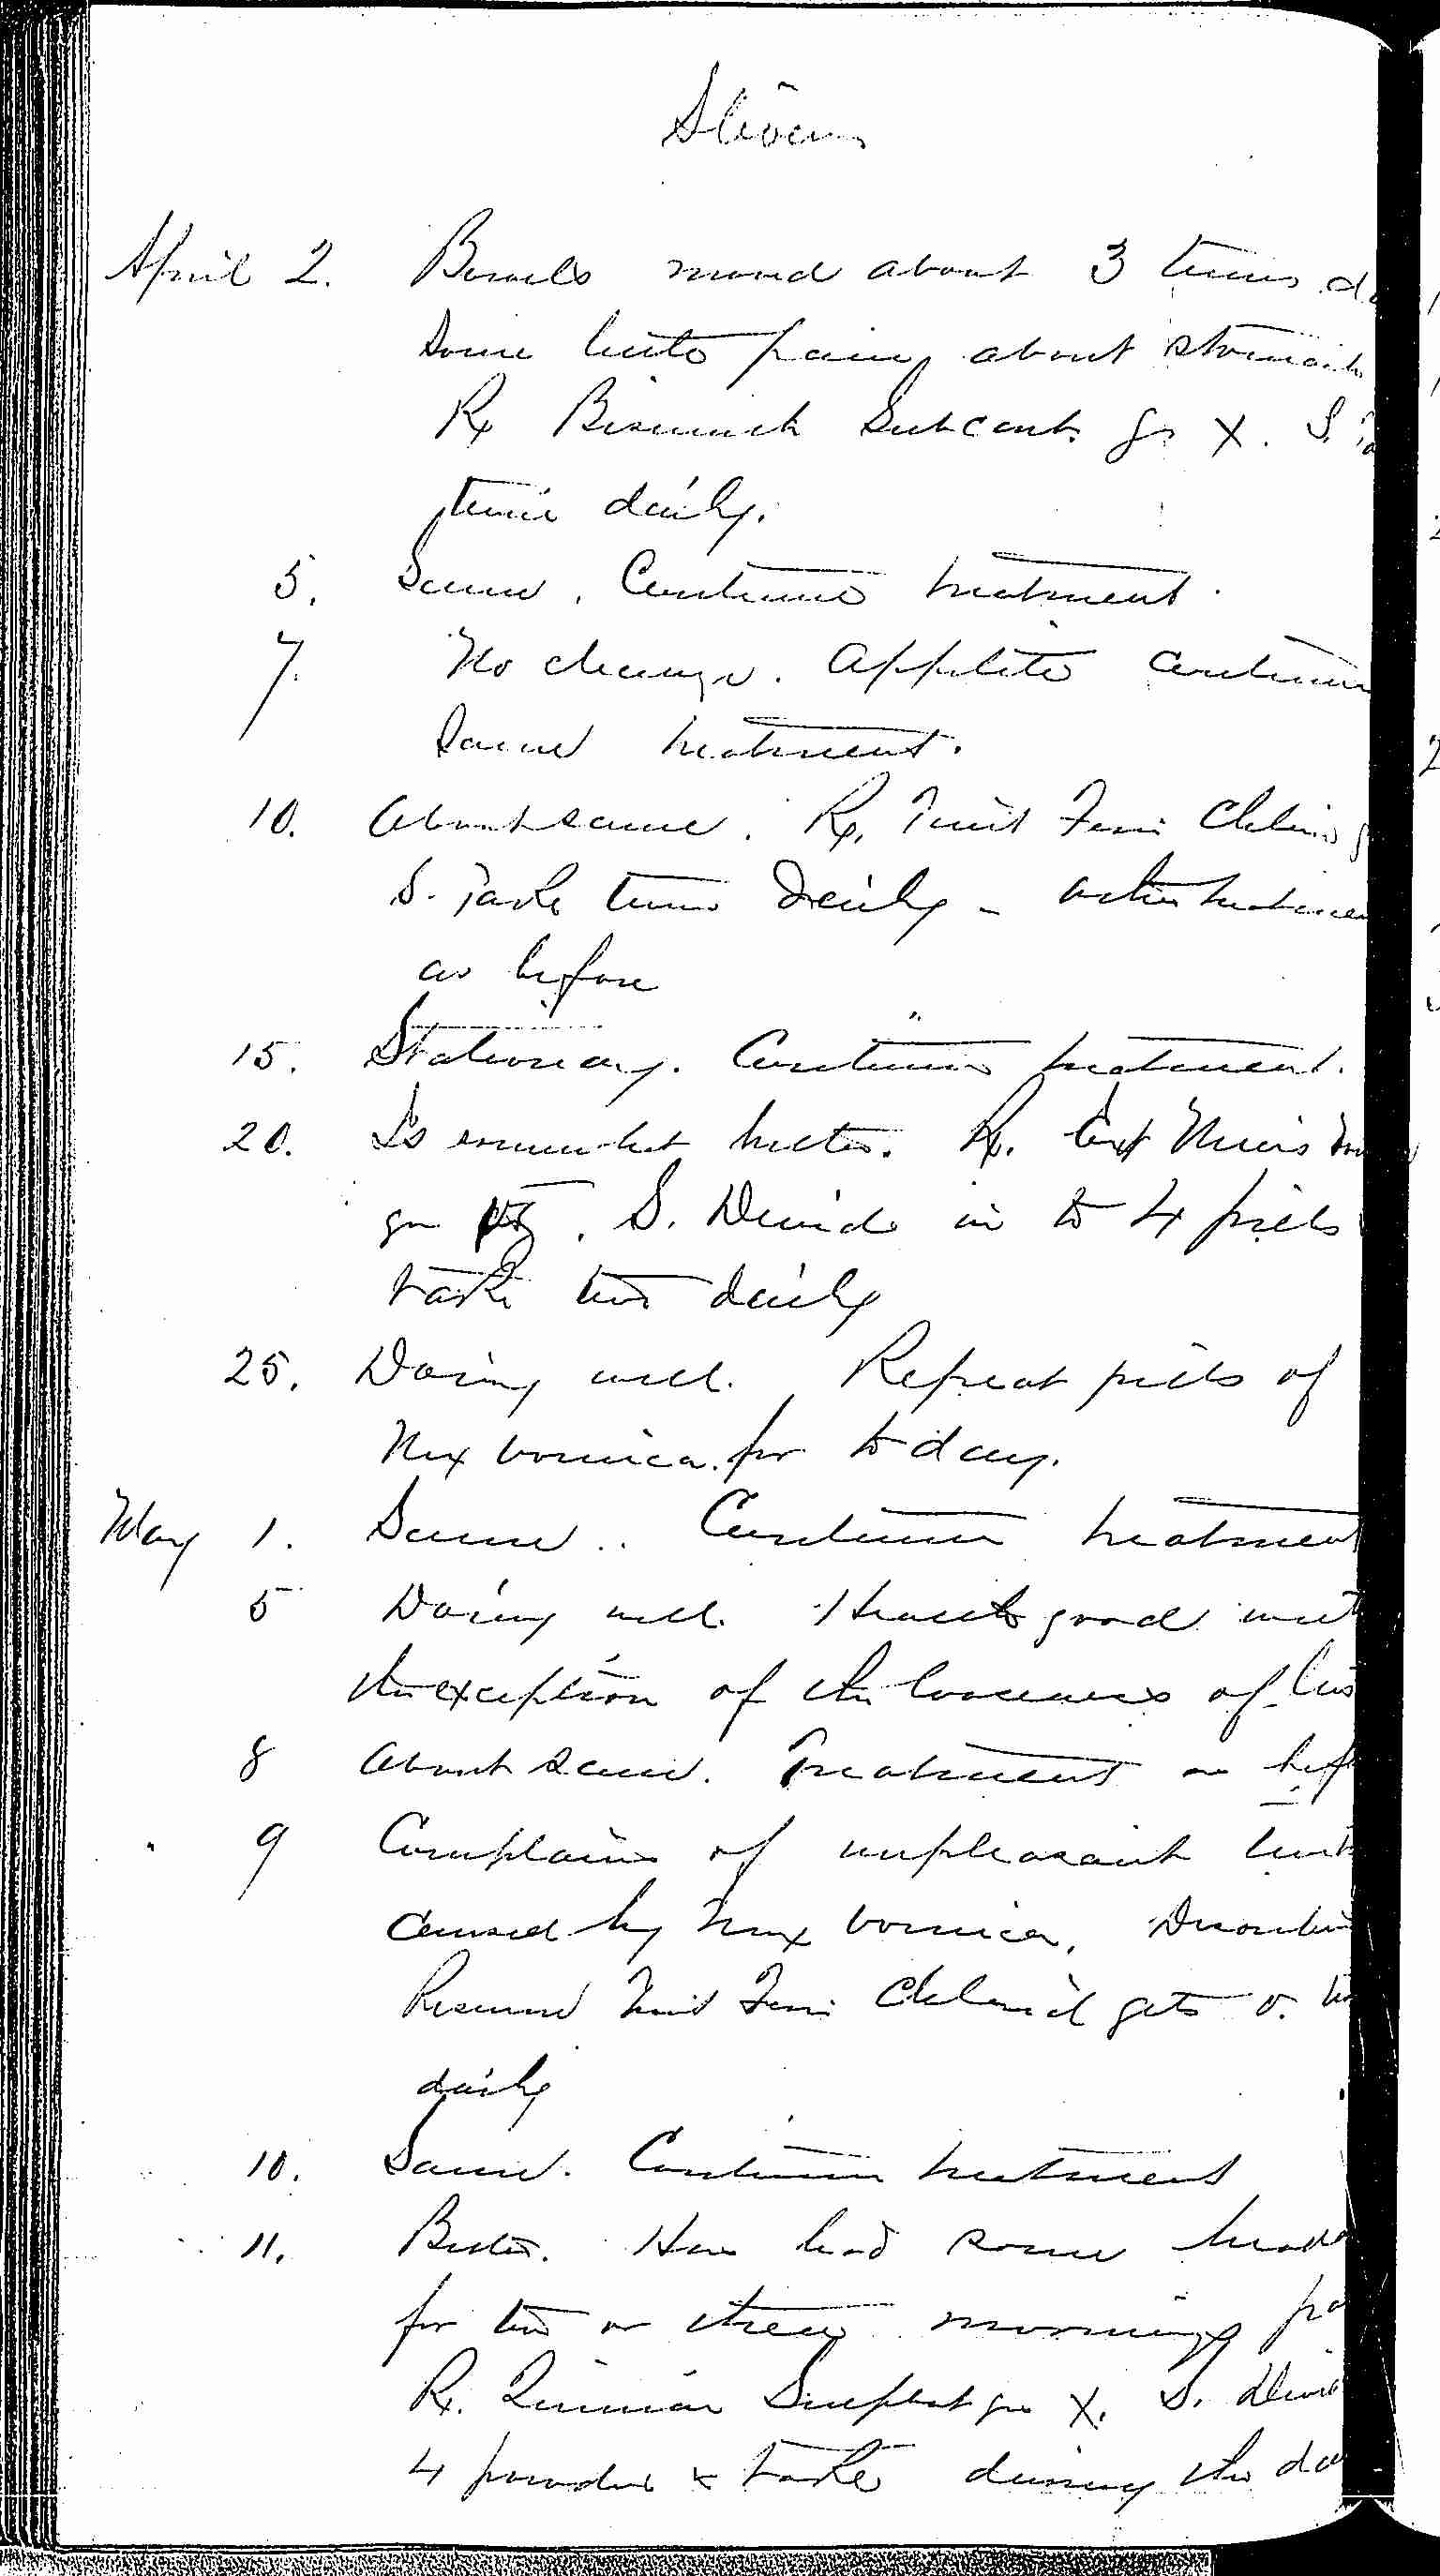 Entry for Edward Stevens (page 4 of 5) in the log Hospital Tickets and Case Papers - Naval Hospital - Washington, D.C. - 1868-69